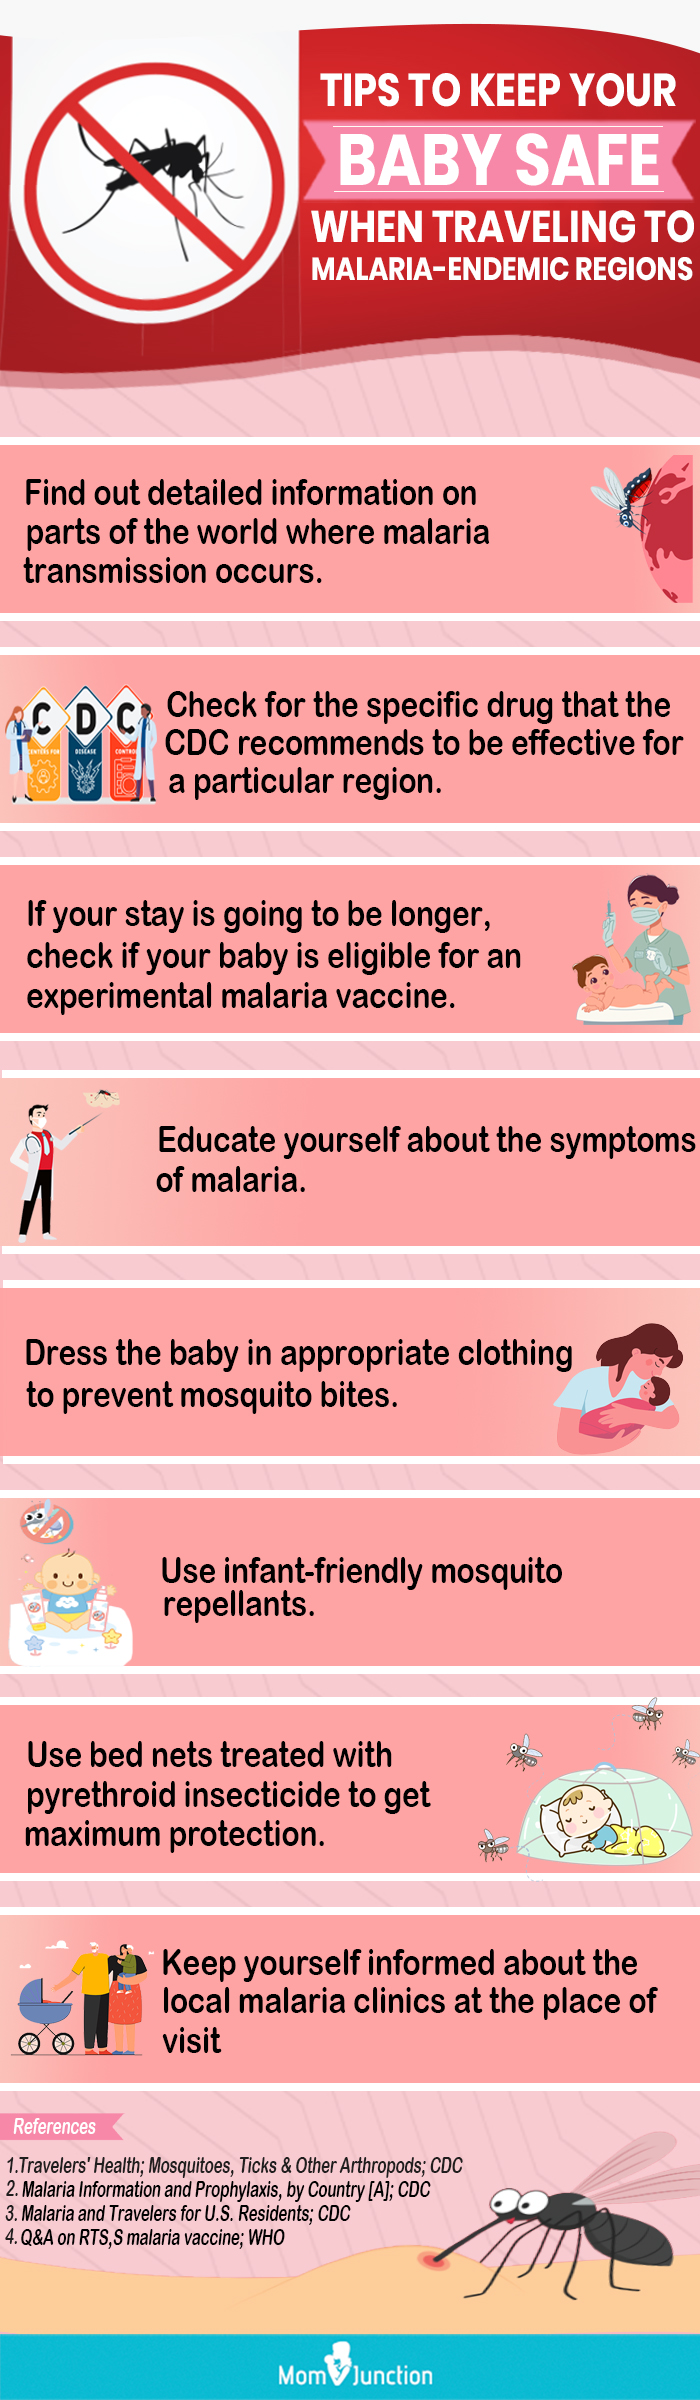 traveling to malaria-endemic regions with babies [infographic]